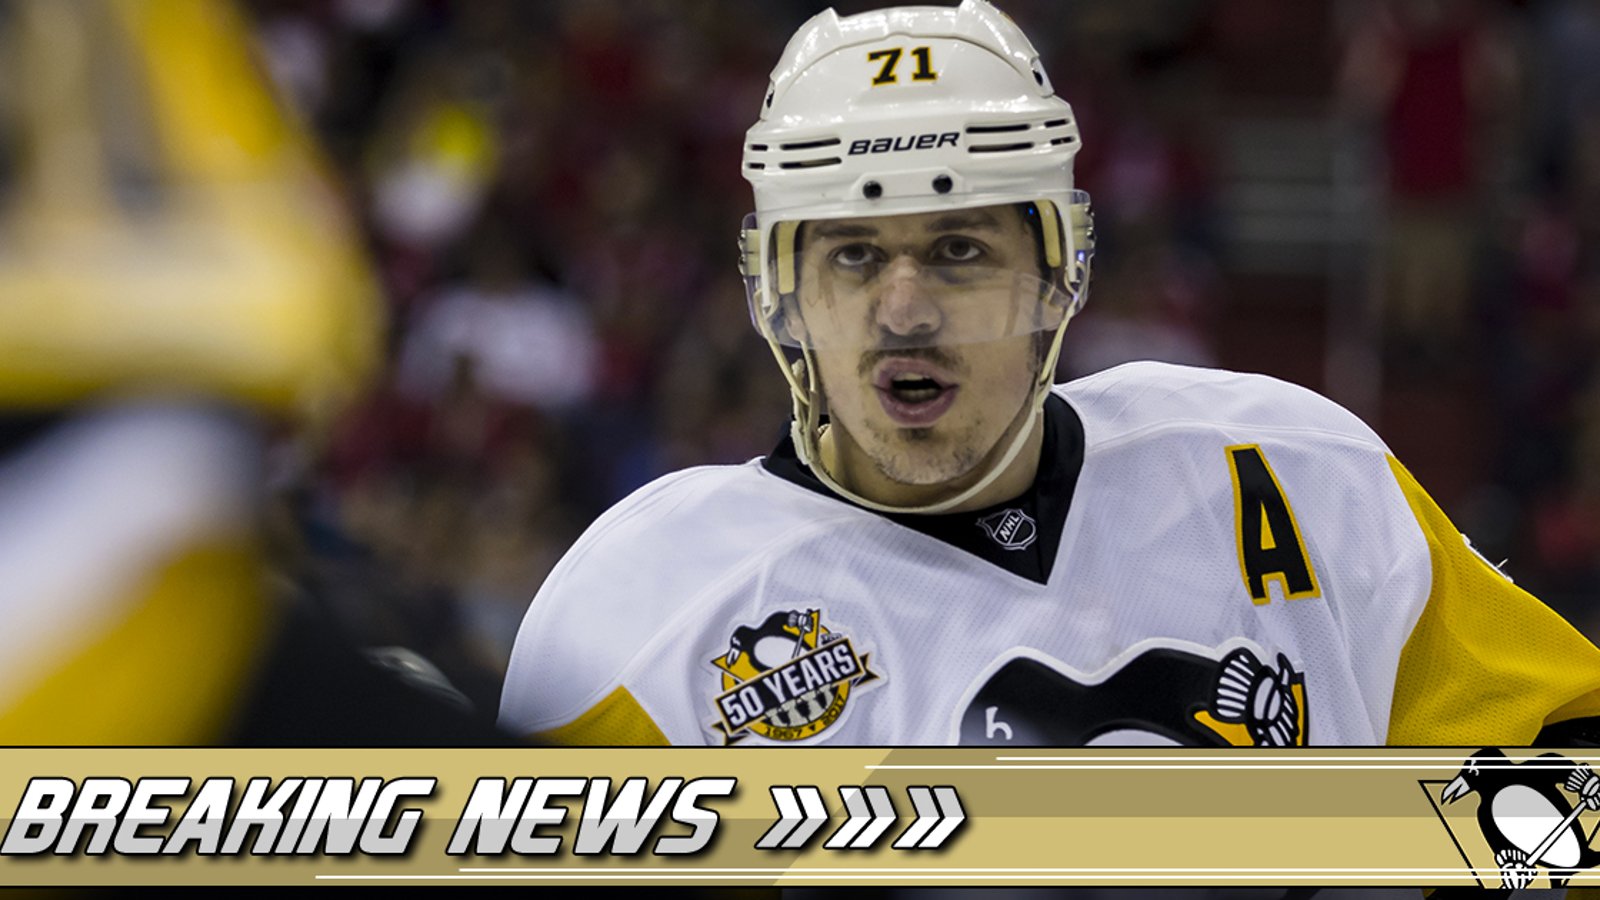 Breaking: Malkin passed a Penguins legend Tuesday night!